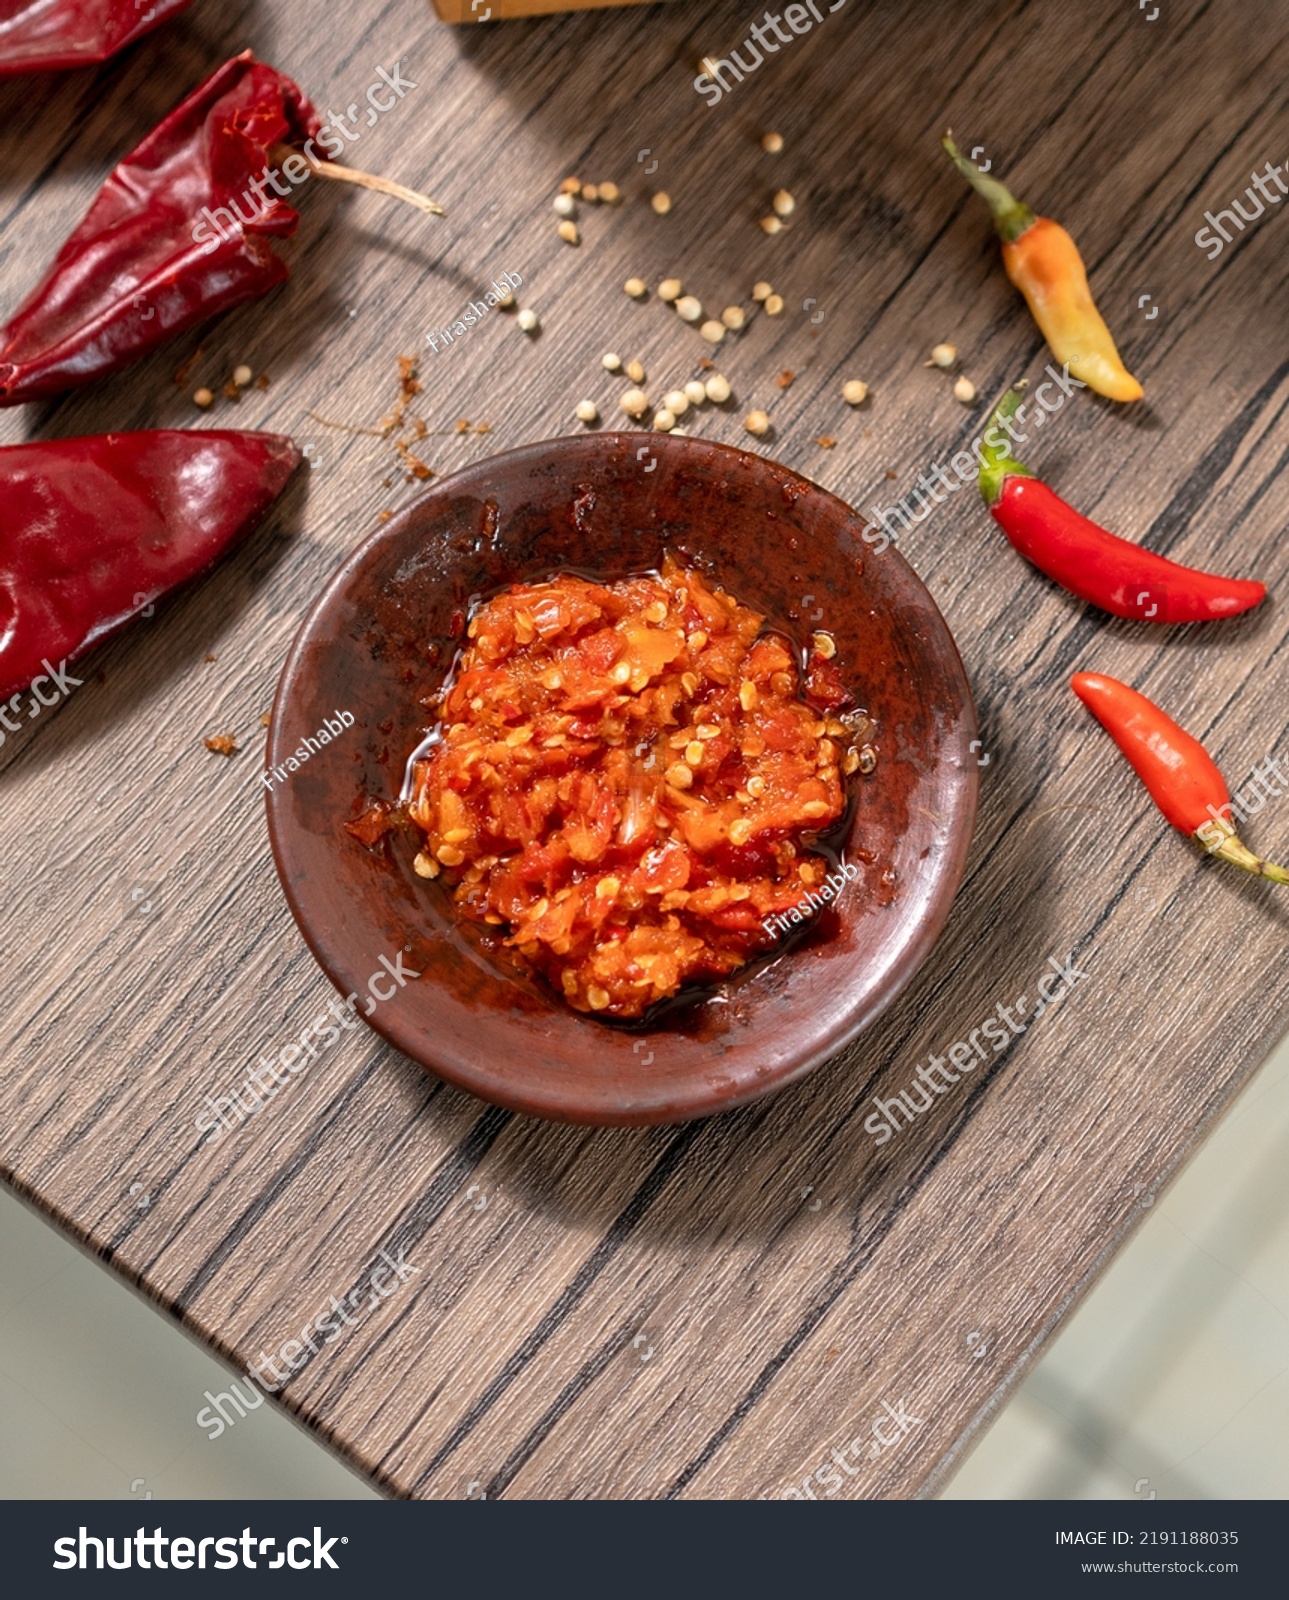 Traditional Indonesian Chili Sauce or Sambal Uleg. Made from Chili, Onion, Garlic, Tomato and Palm Oil. It's Made Using Uleg or Food Smasher from Claypot.  #2191188035